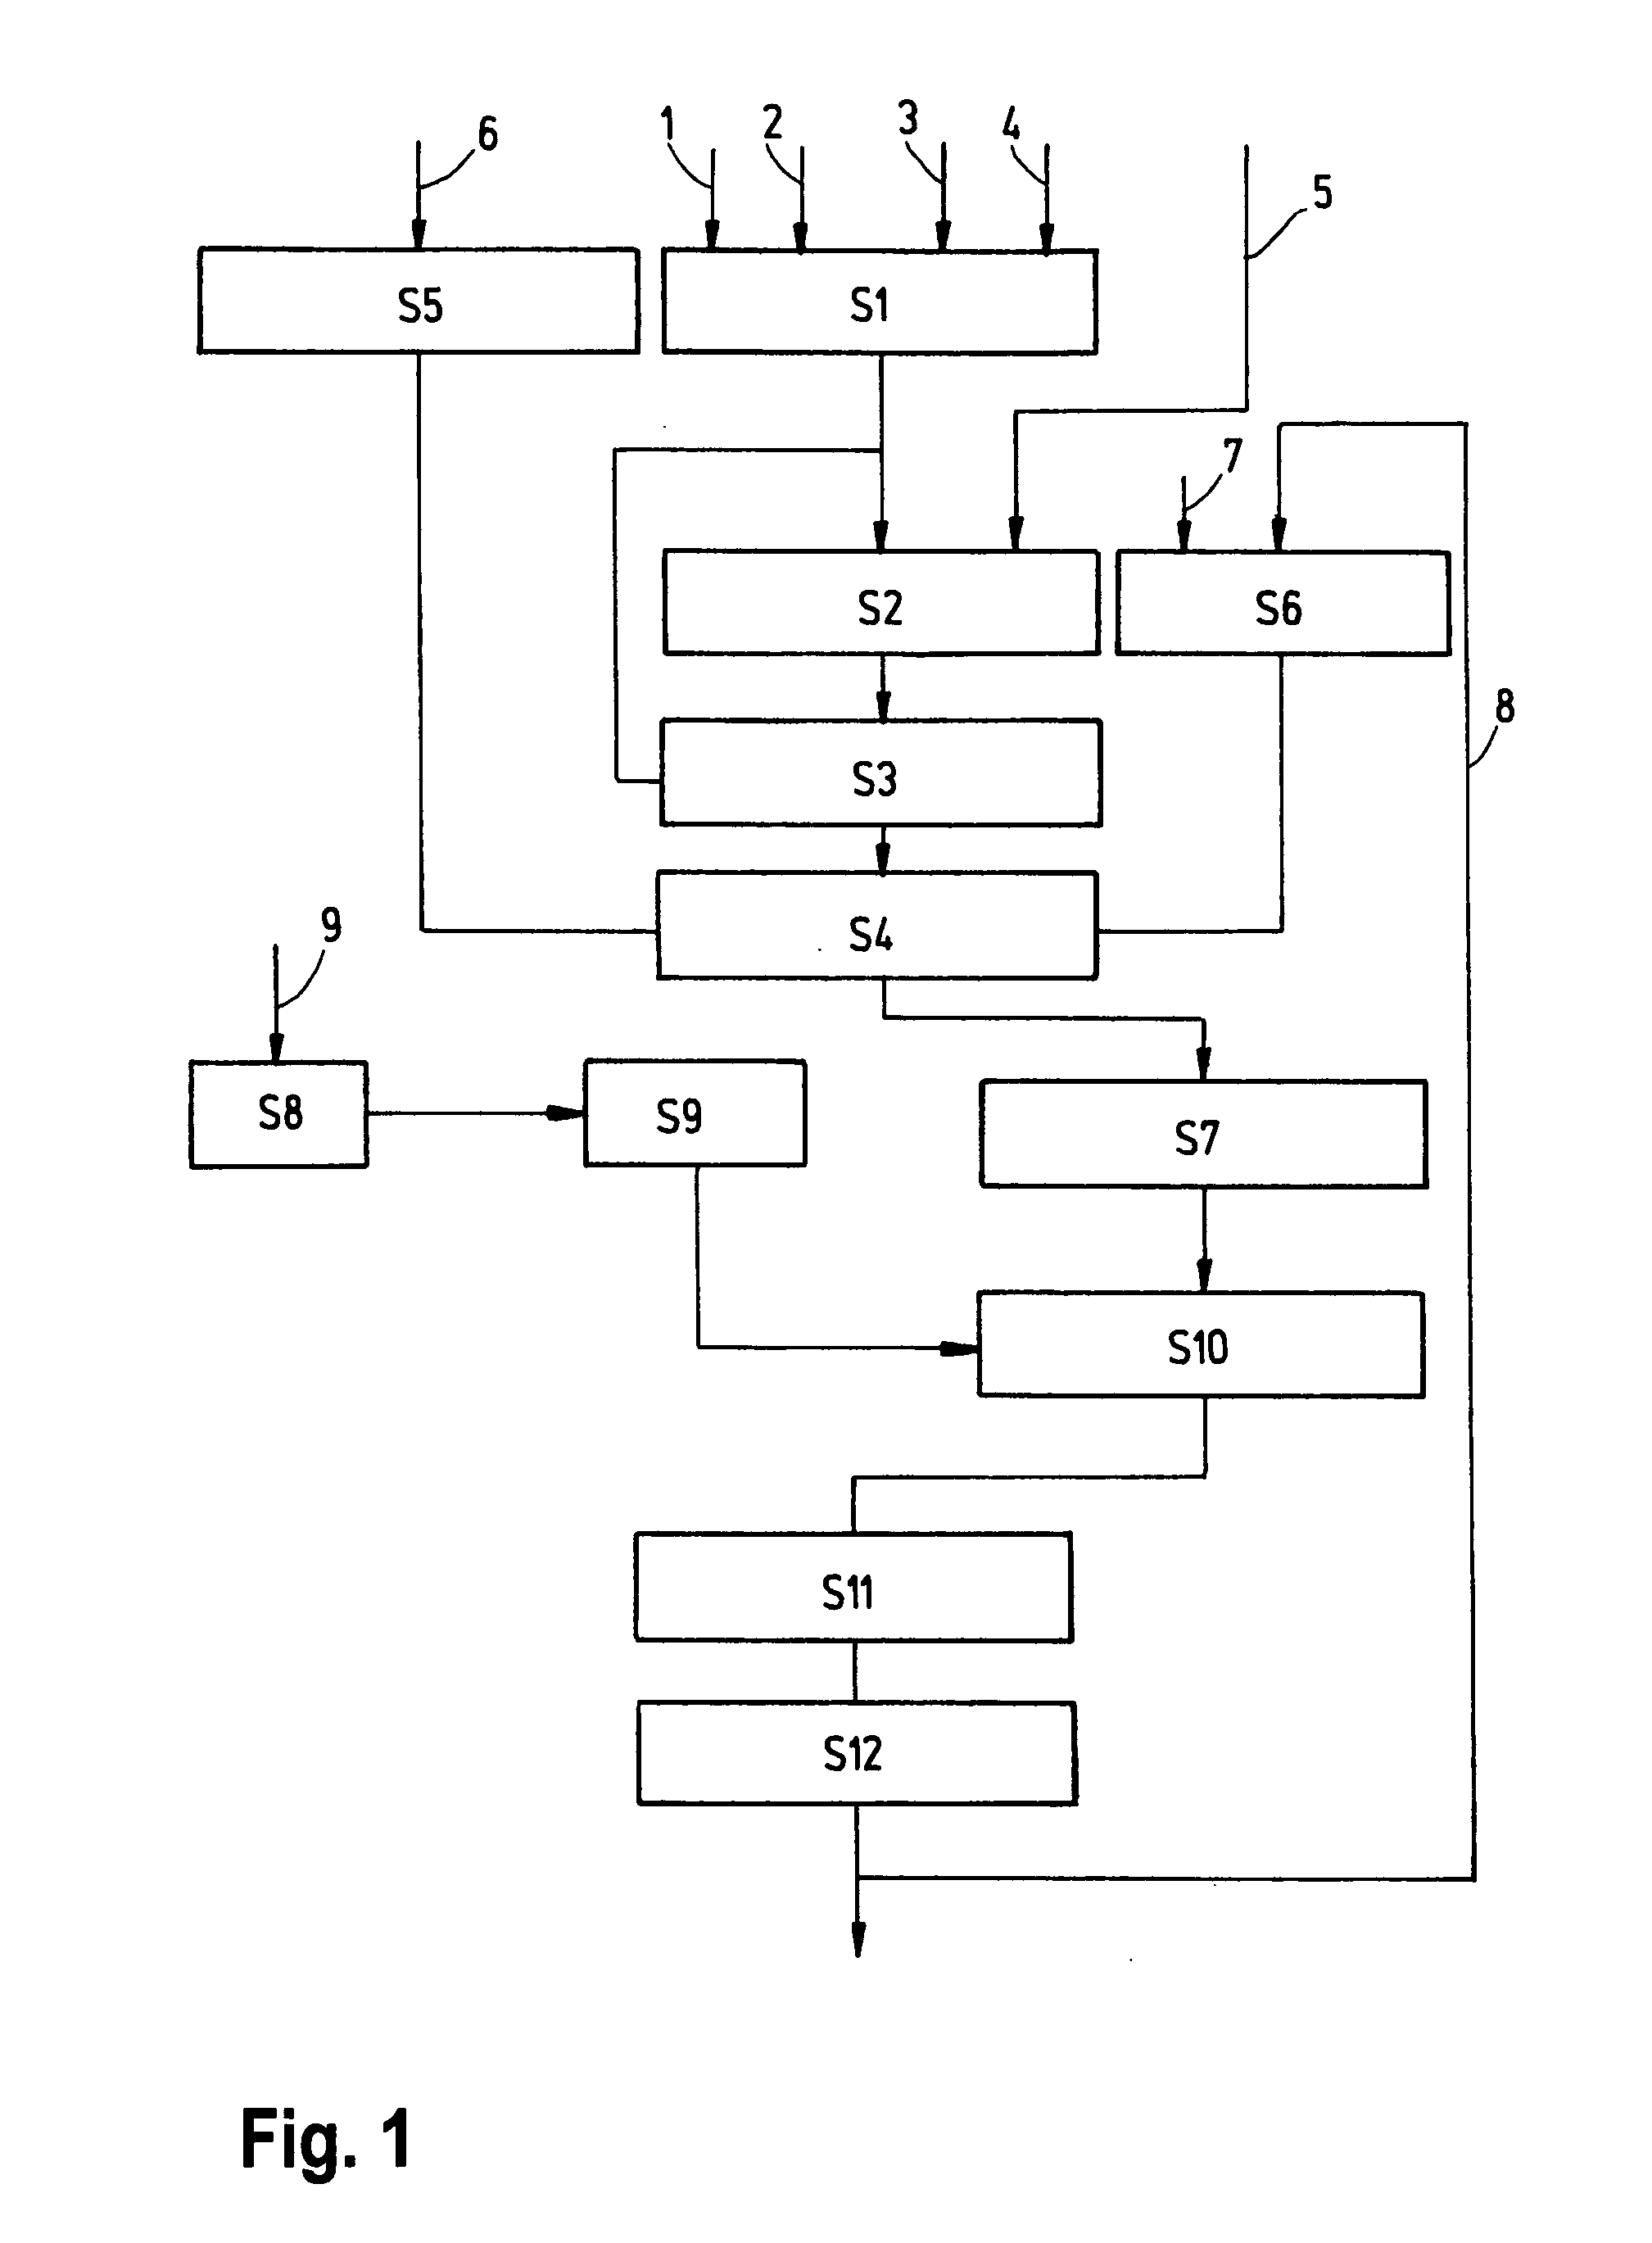 Method for determining an estimate of the mass of a motor vehicle